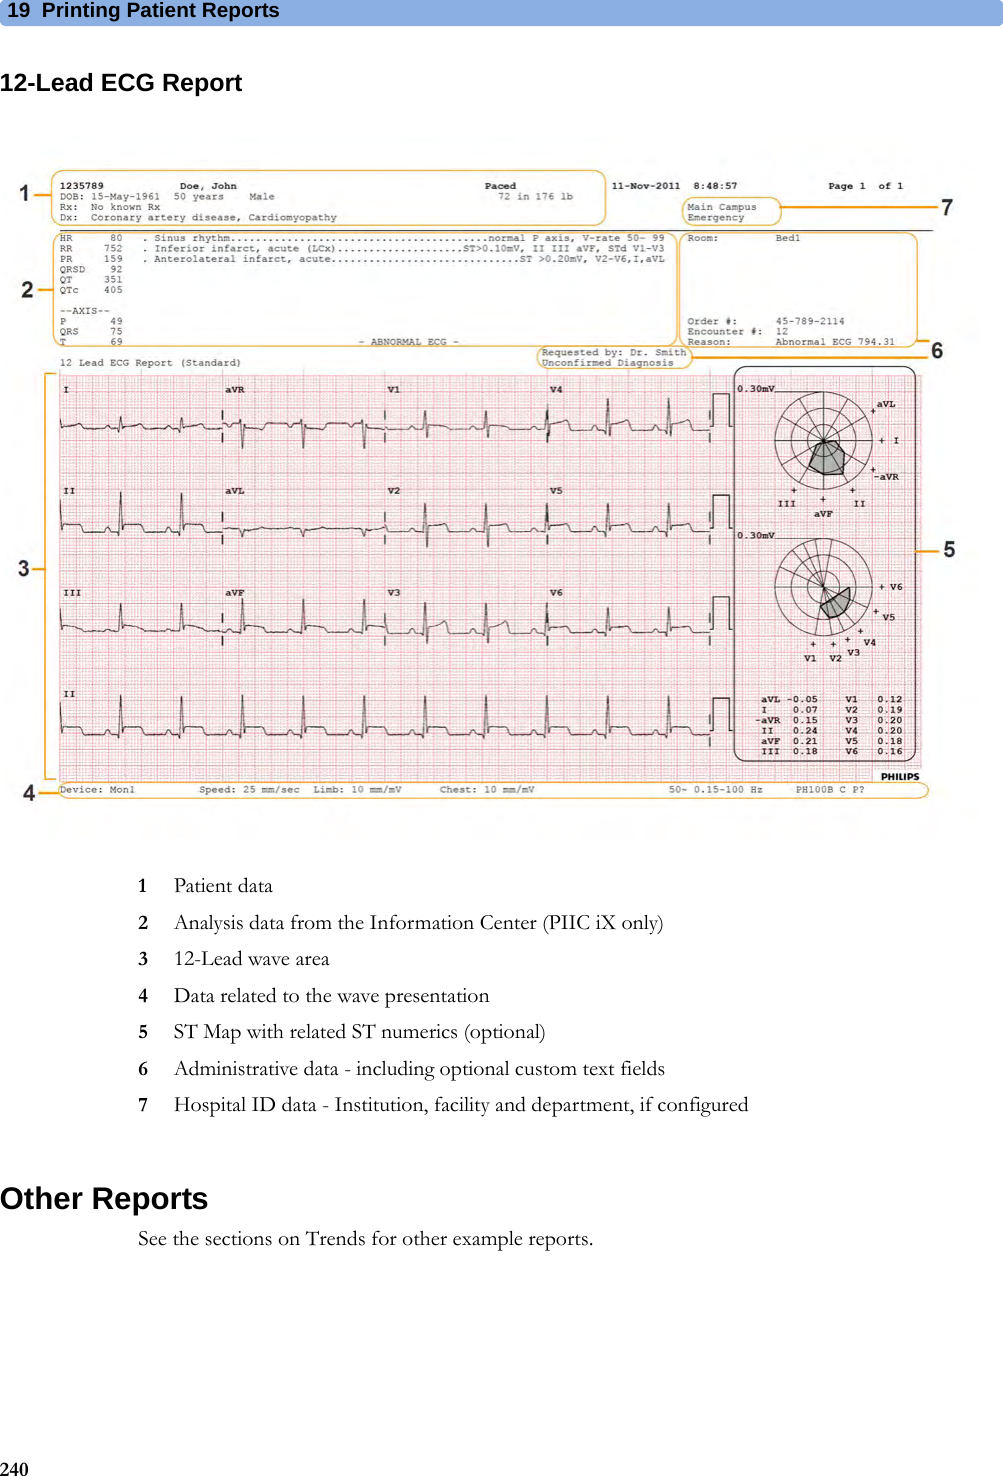 19 Printing Patient Reports24012-Lead ECG Report1Patient data2Analysis data from the Information Center (PIIC iX only)312-Lead wave area4Data related to the wave presentation5ST Map with related ST numerics (optional)6Administrative data - including optional custom text fields7Hospital ID data - Institution, facility and department, if configuredOther ReportsSee the sections on Trends for other example reports.